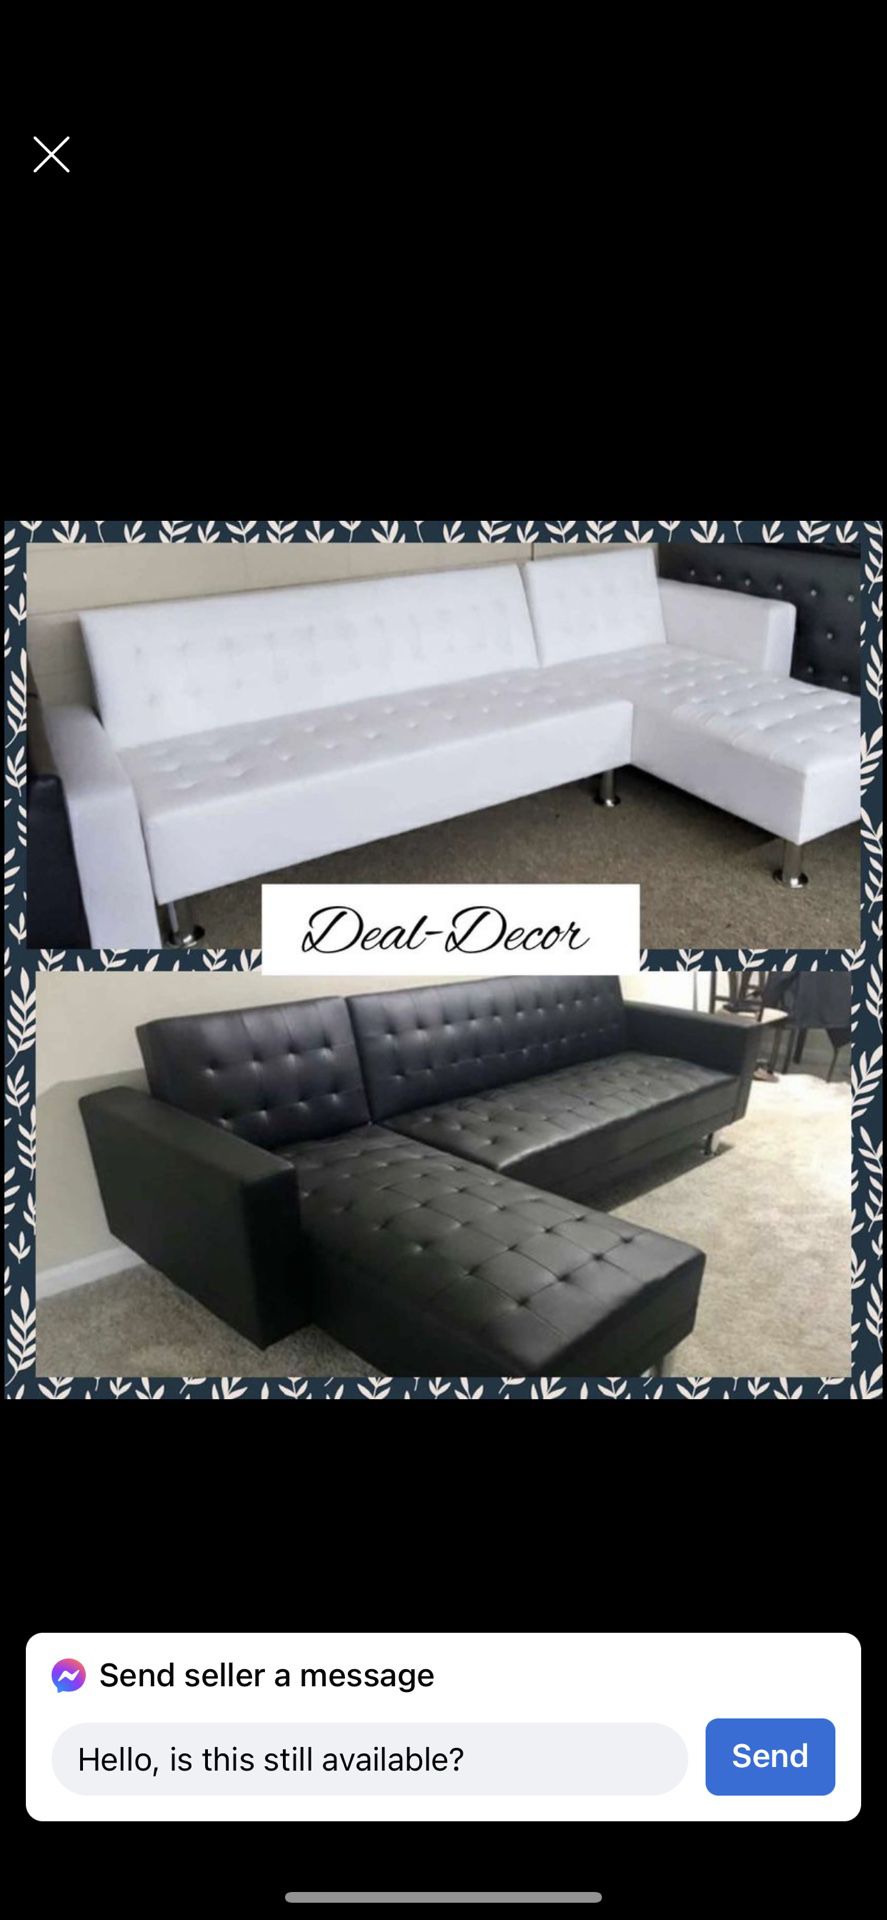 New Black Or White Futon Sectional Sofabed Couch (reversible Chaise)